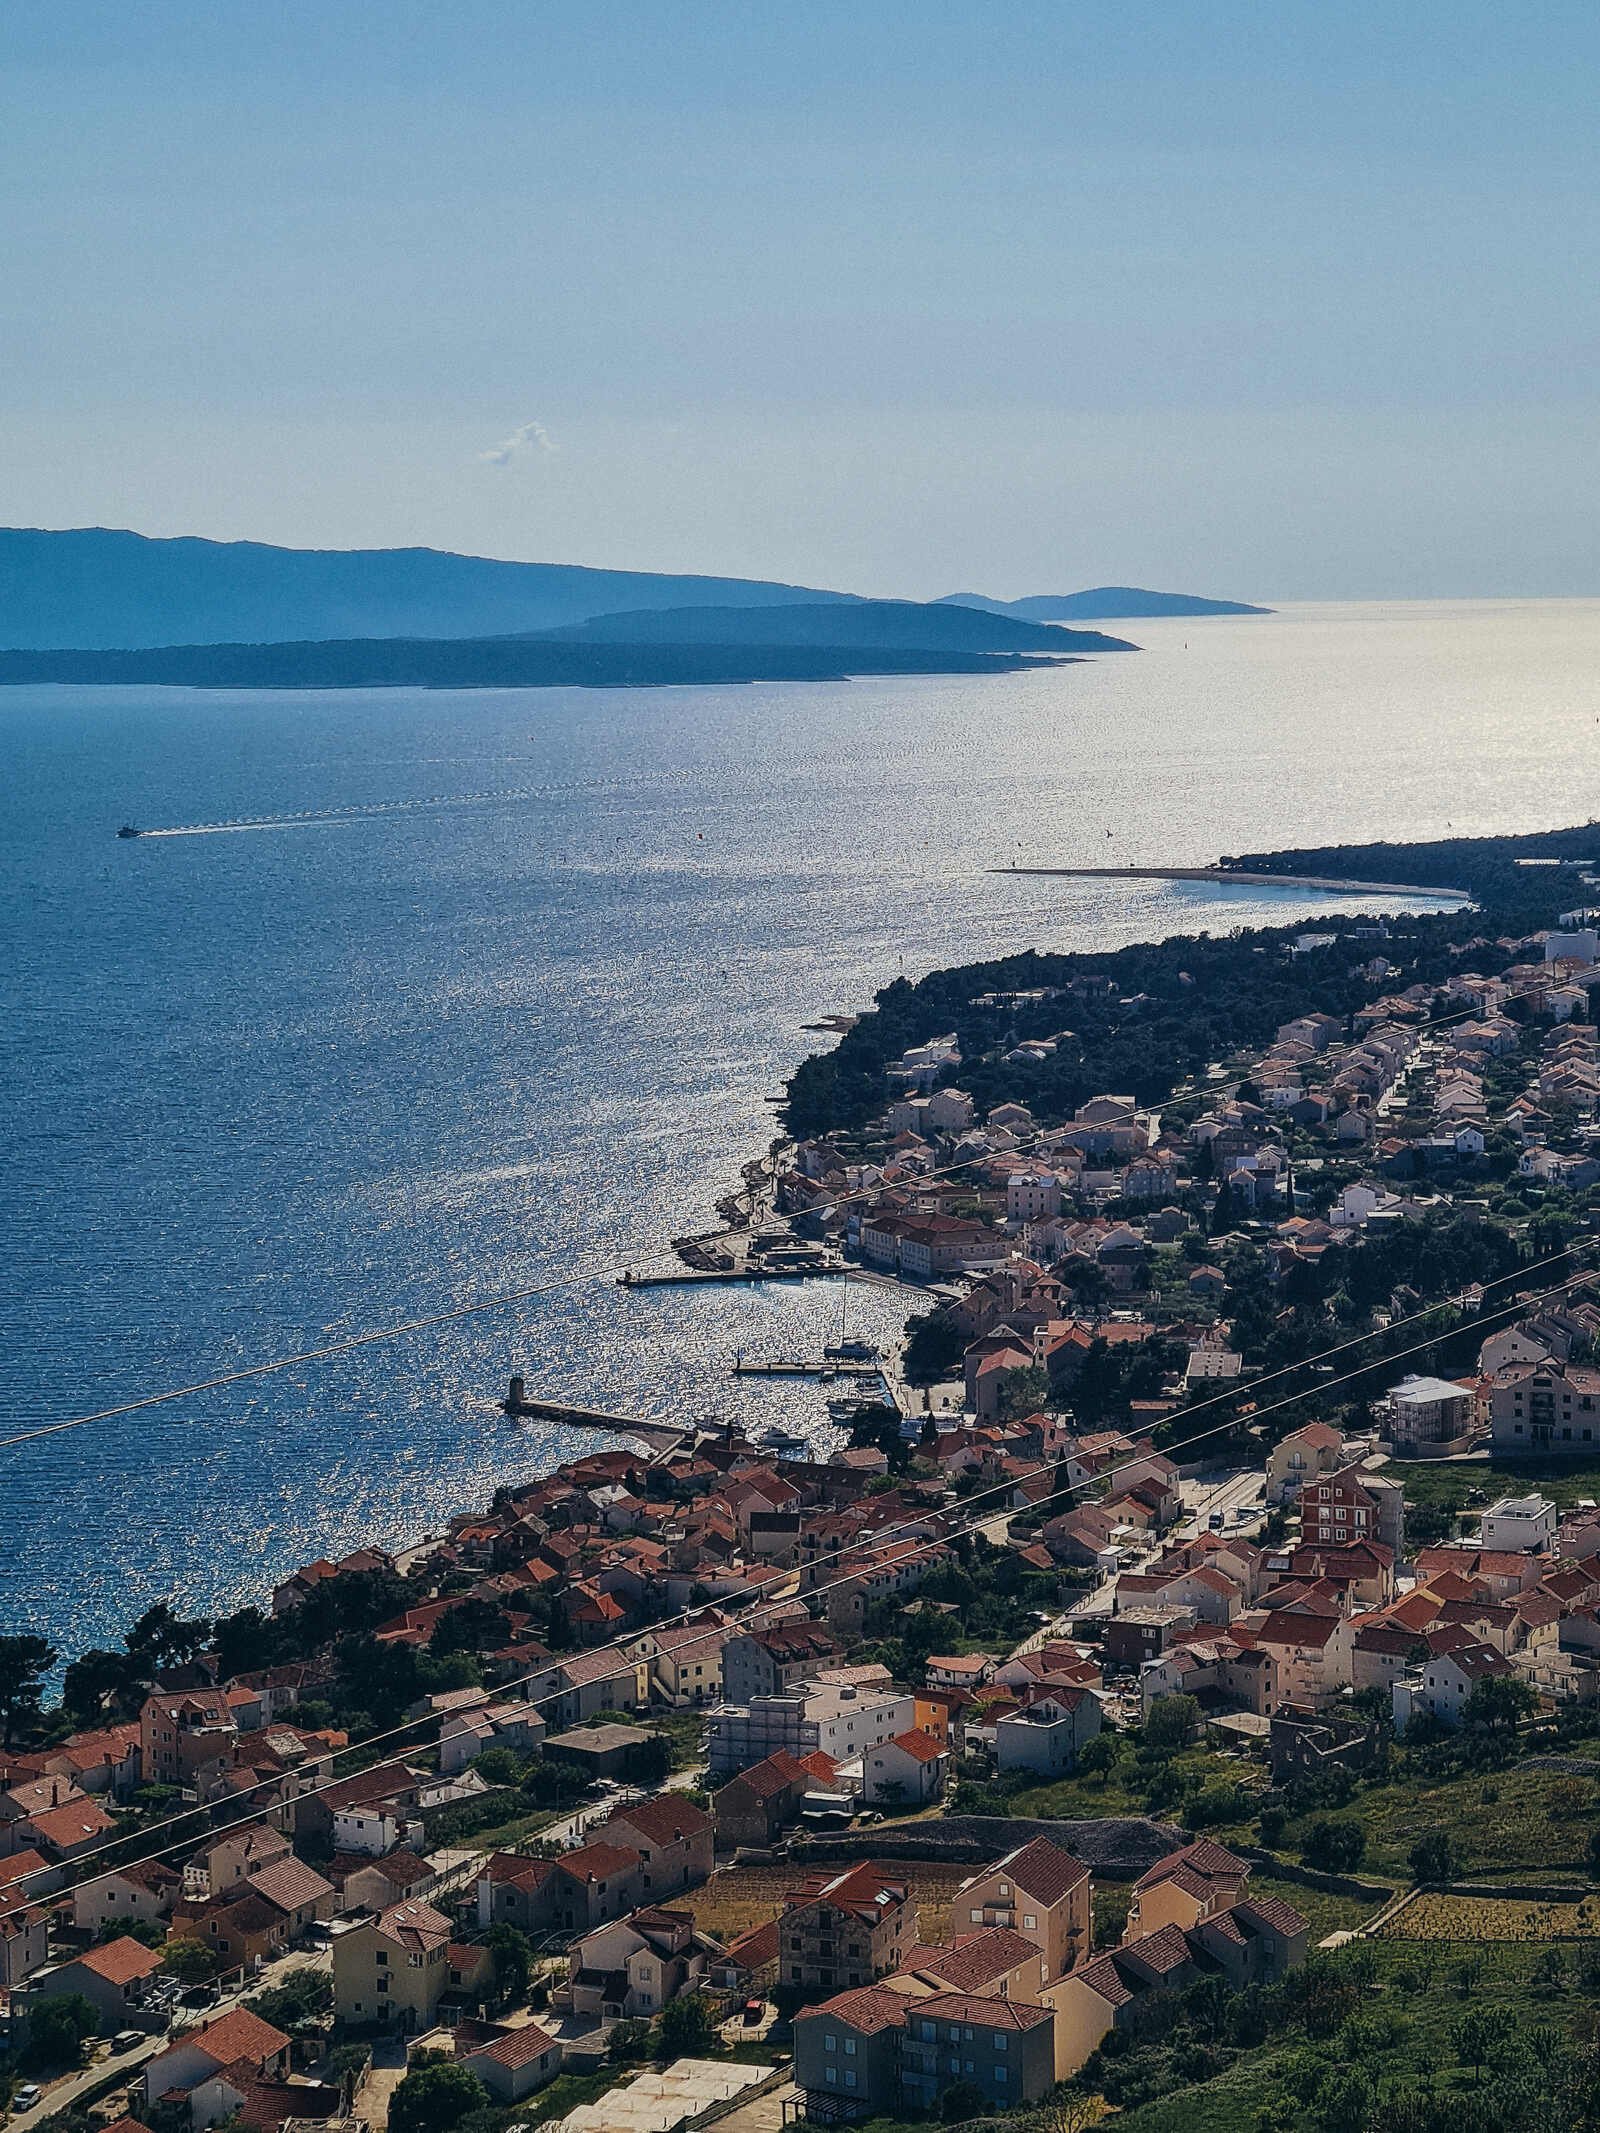 A view looking down on Bol town on the sea edge with other islands in the distance, view from the top of a mountain